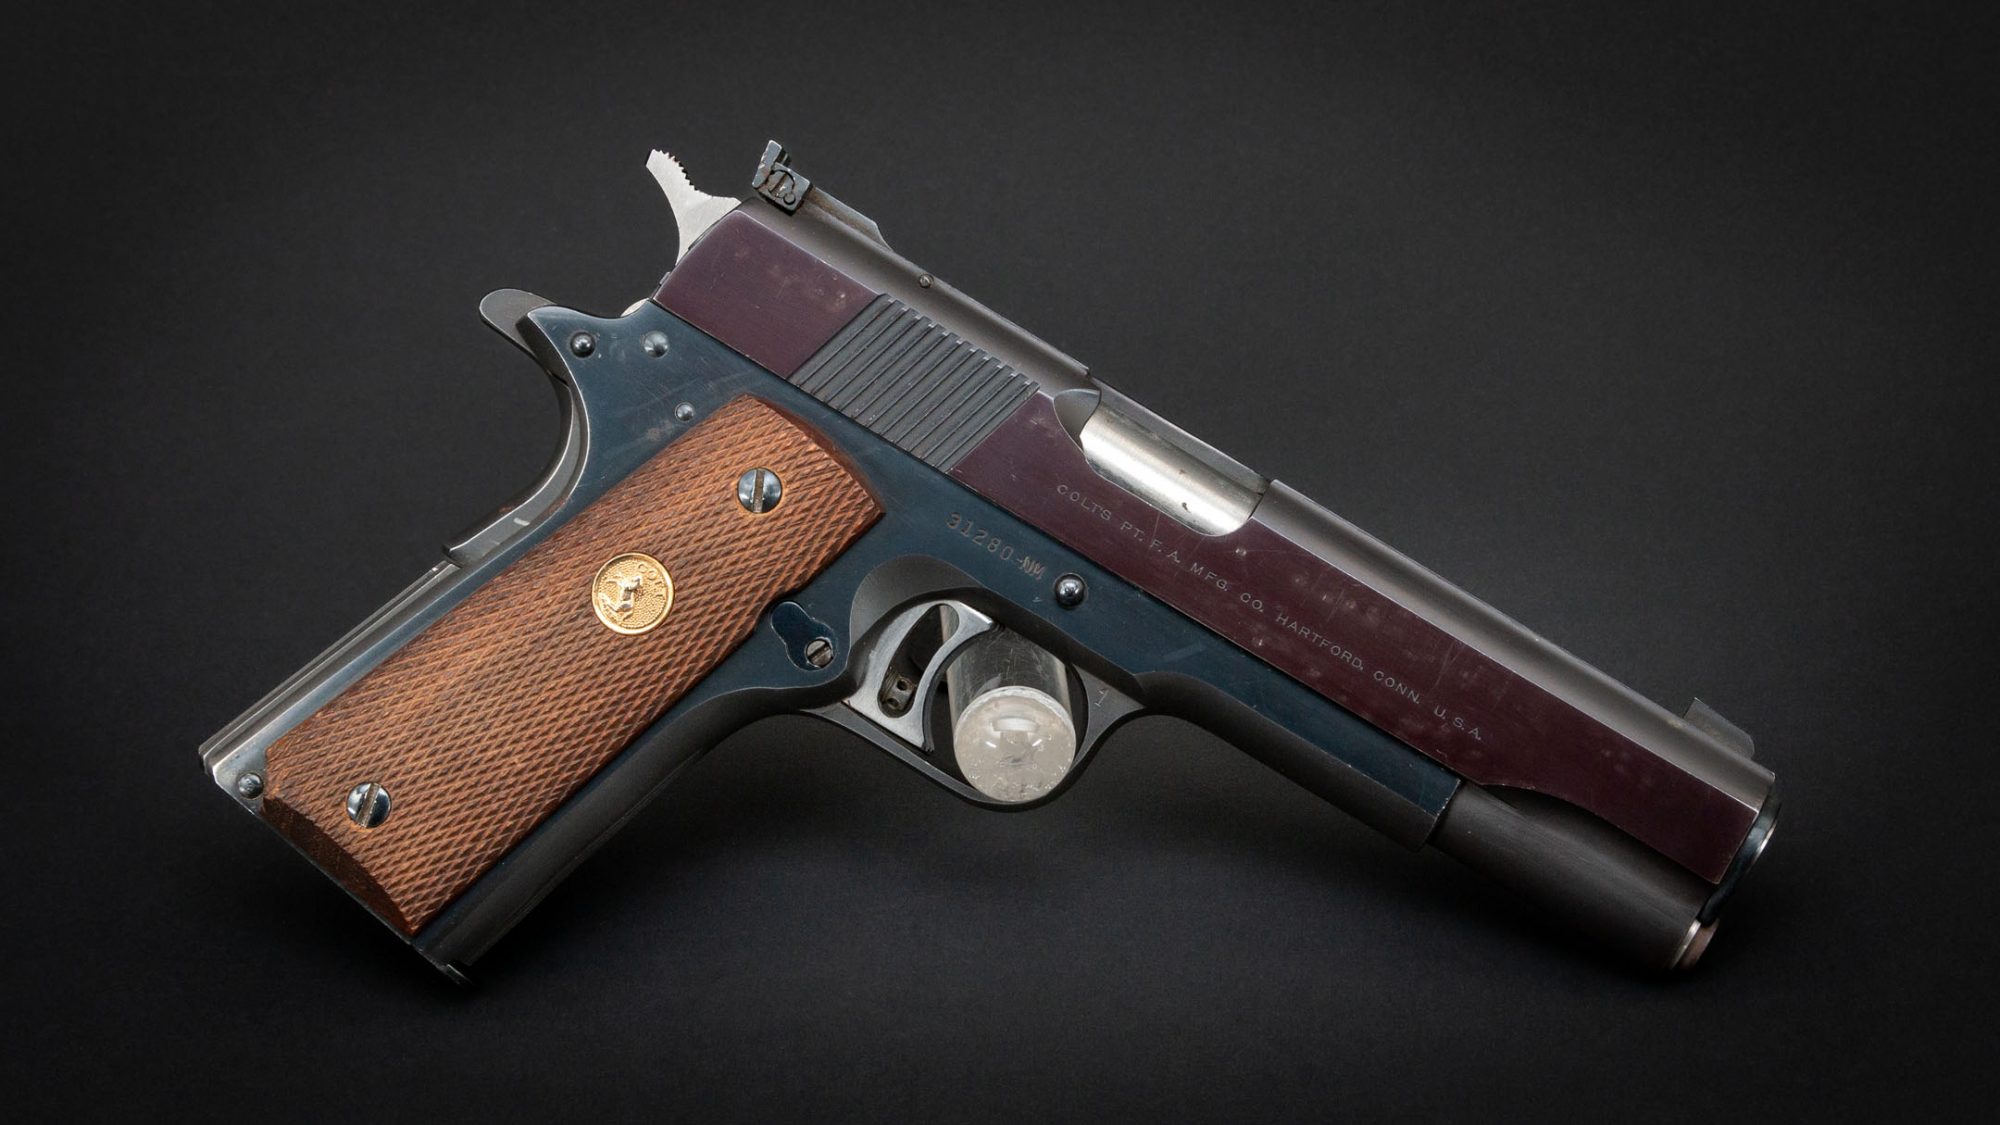 Colt M1911 Gold Cup National Match in .45 ACP, for sale by Turnbull Restoration Co. of Bloomfield, NY